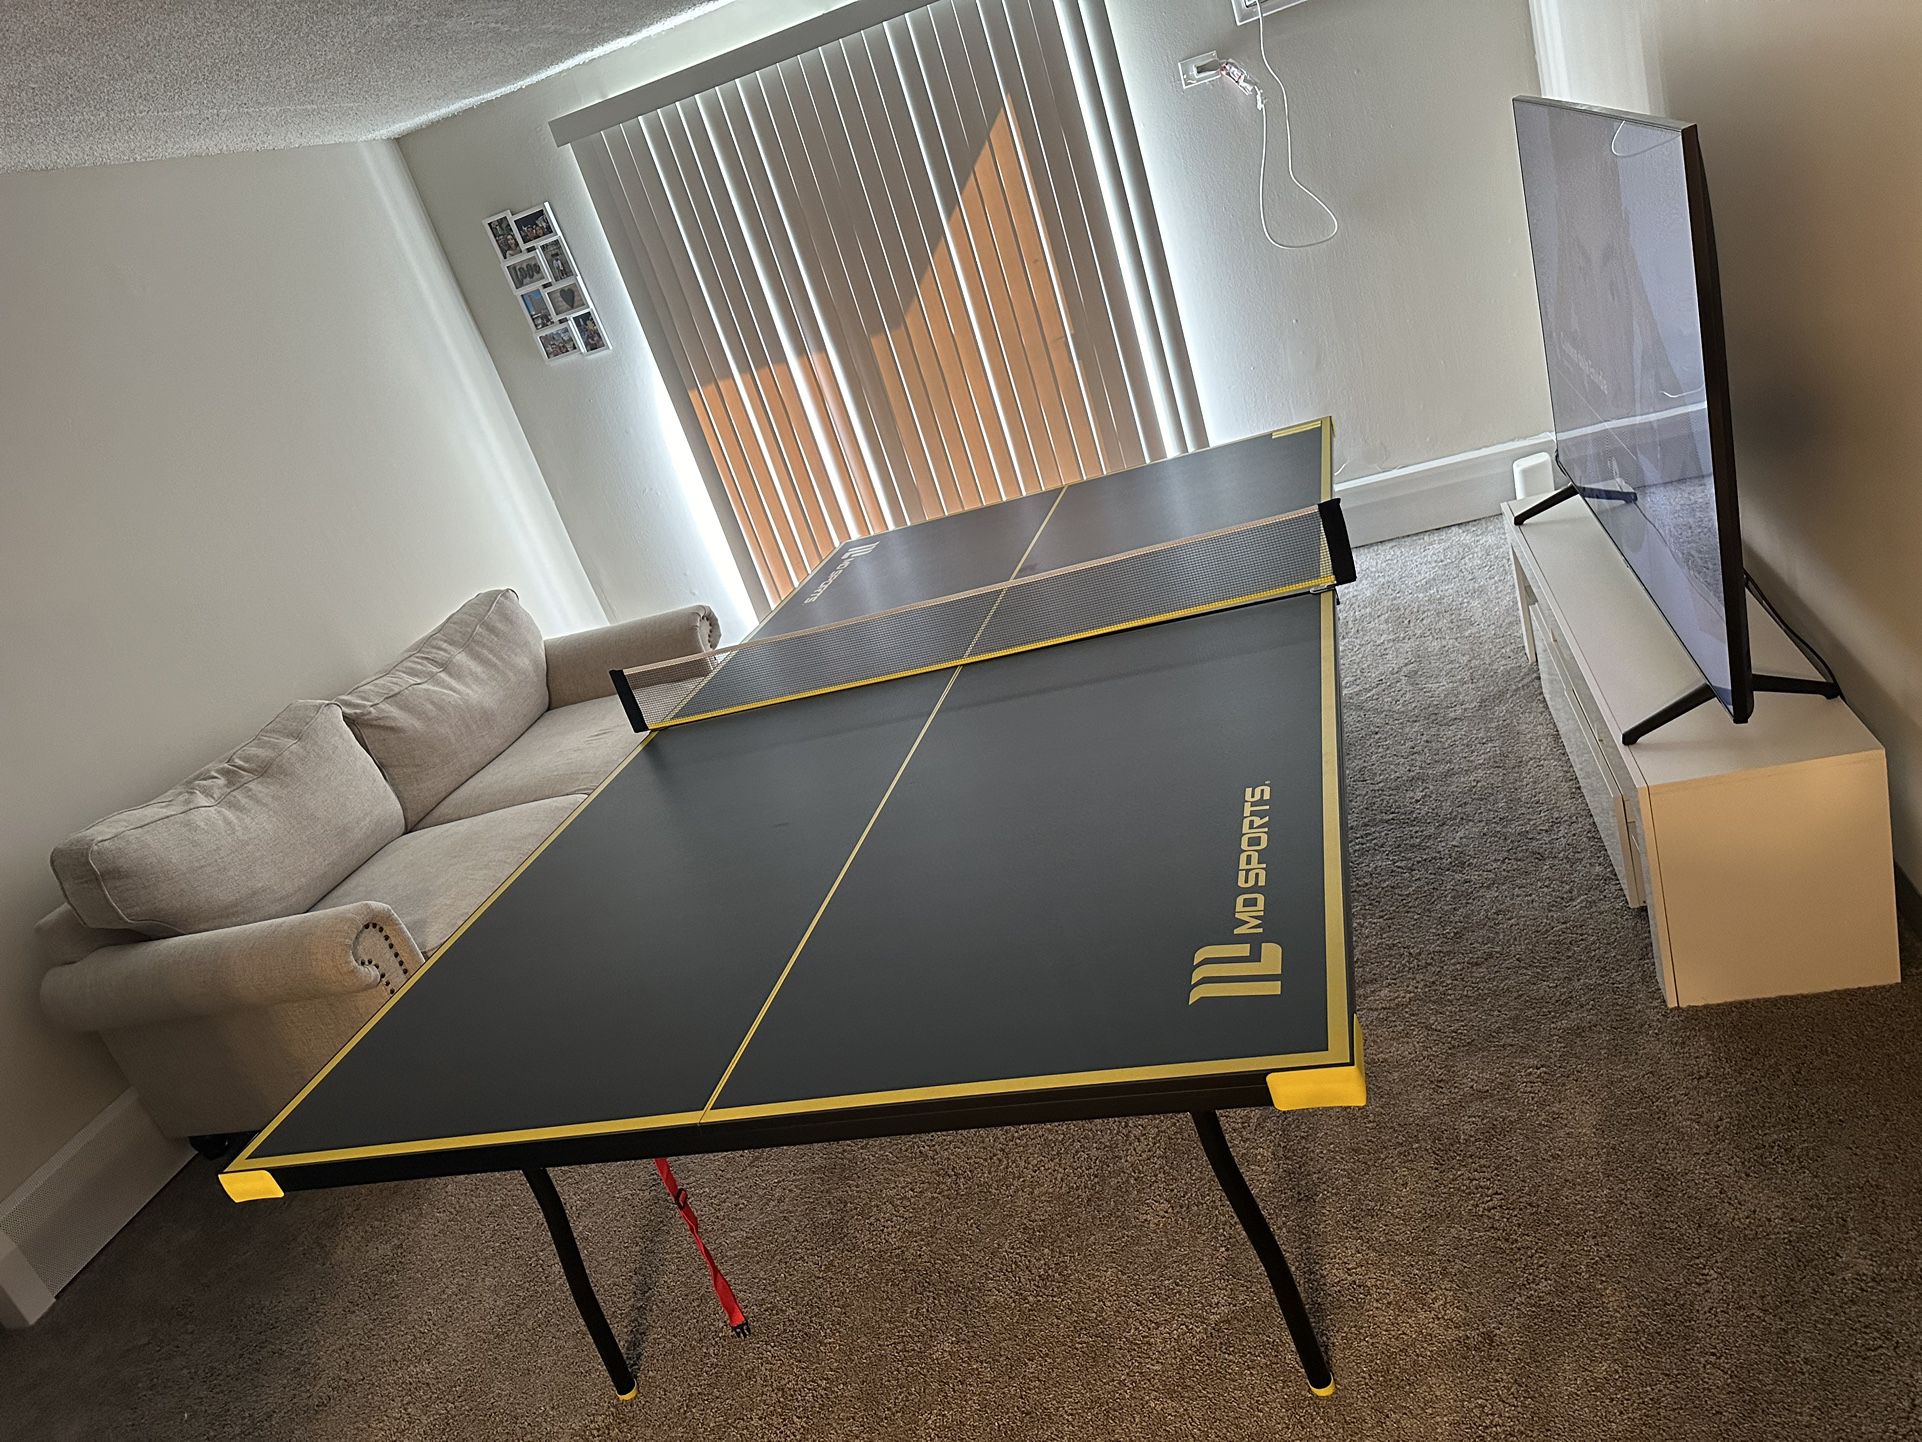 Foldable Ping Pong Table